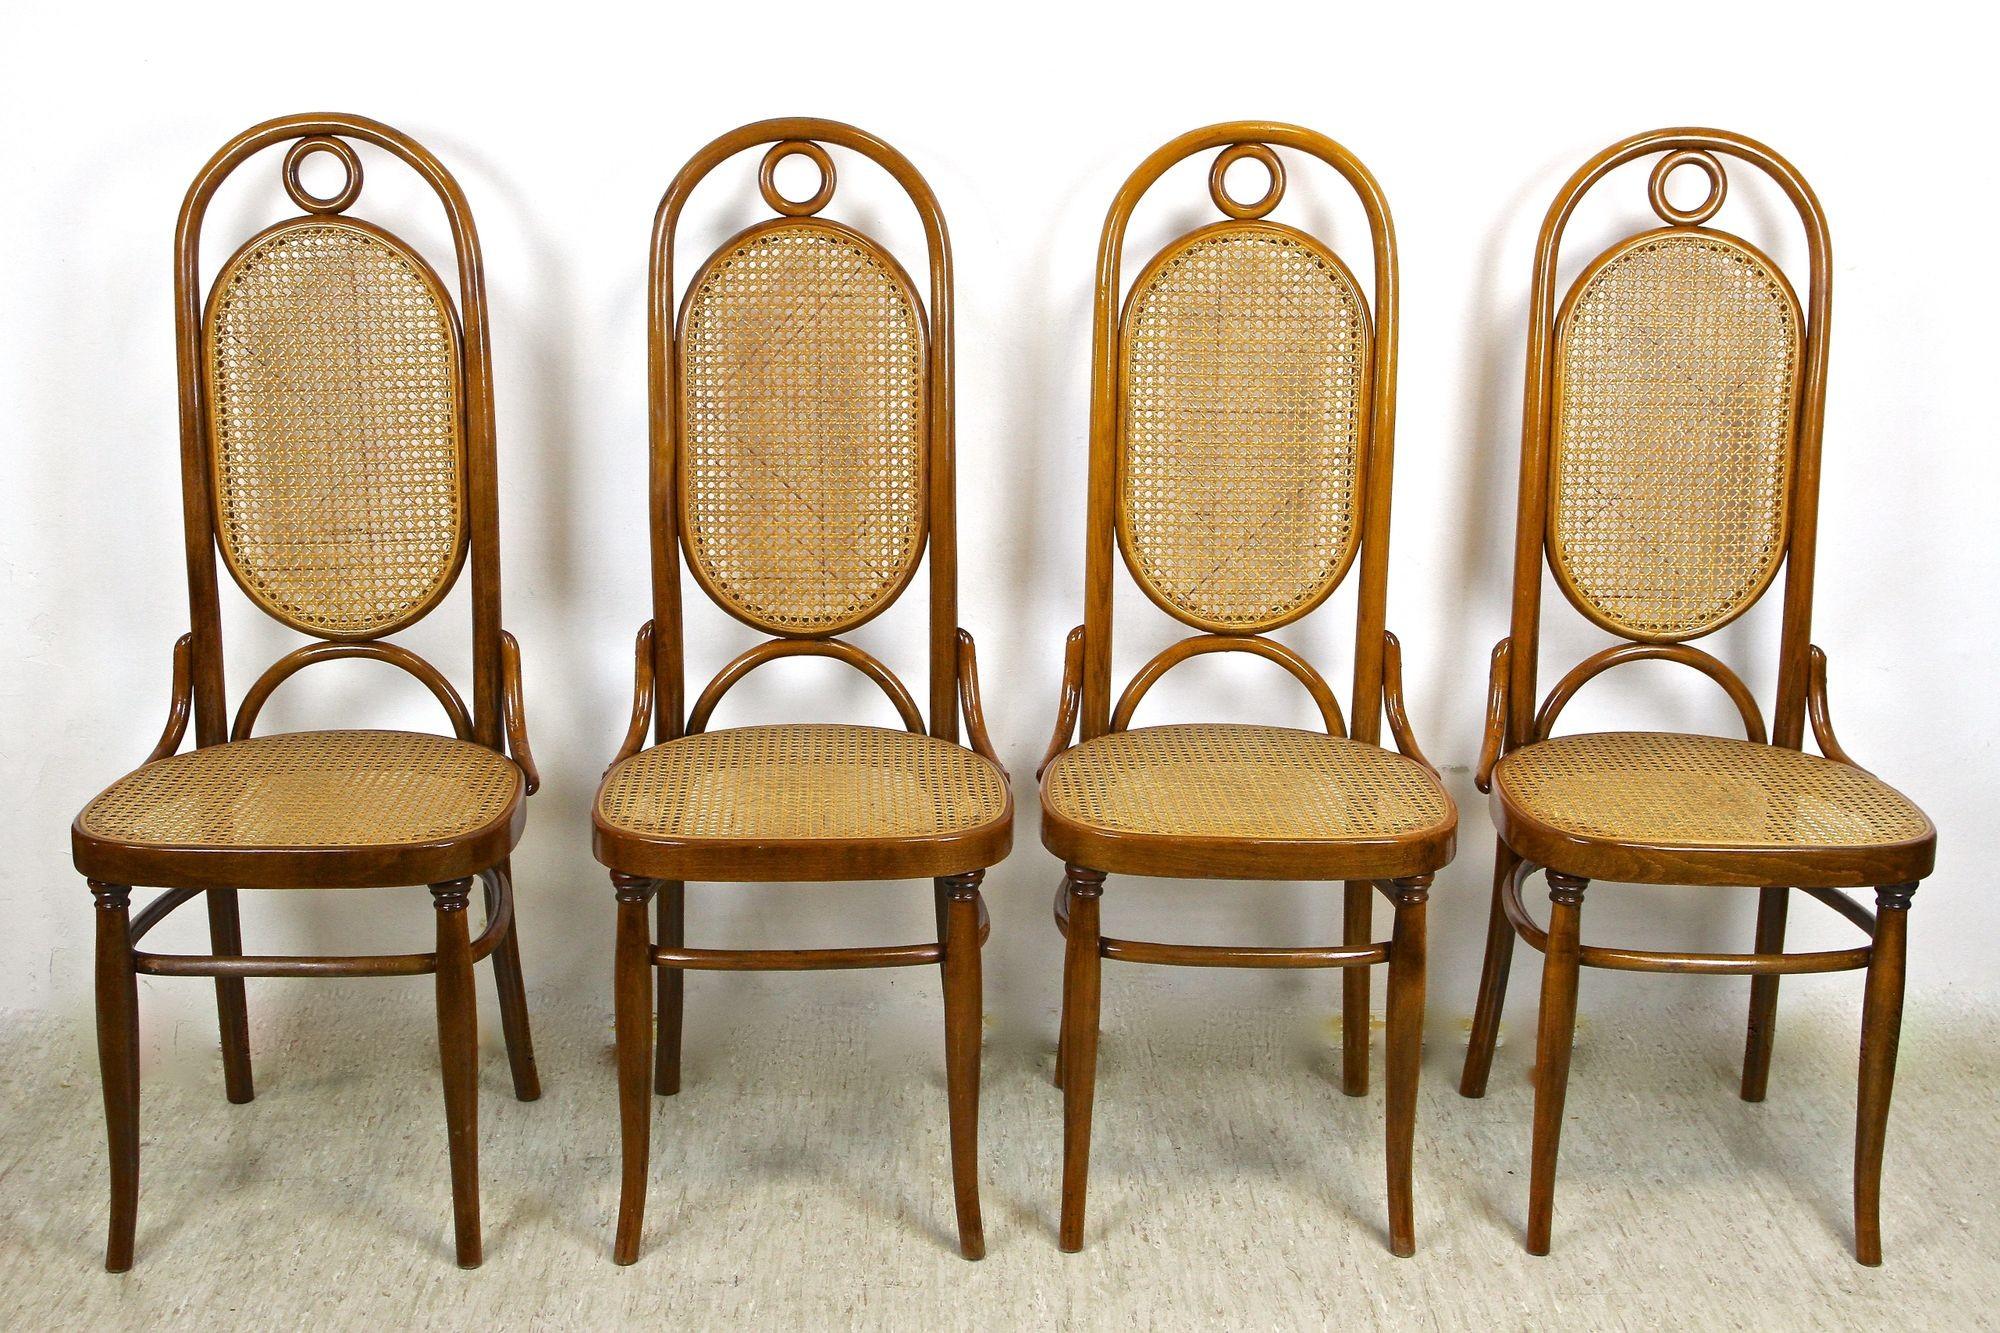 Thonet Bentwood Chairs with Table, Art Nouveau Seating Set, Austria, circa 1915 For Sale 10